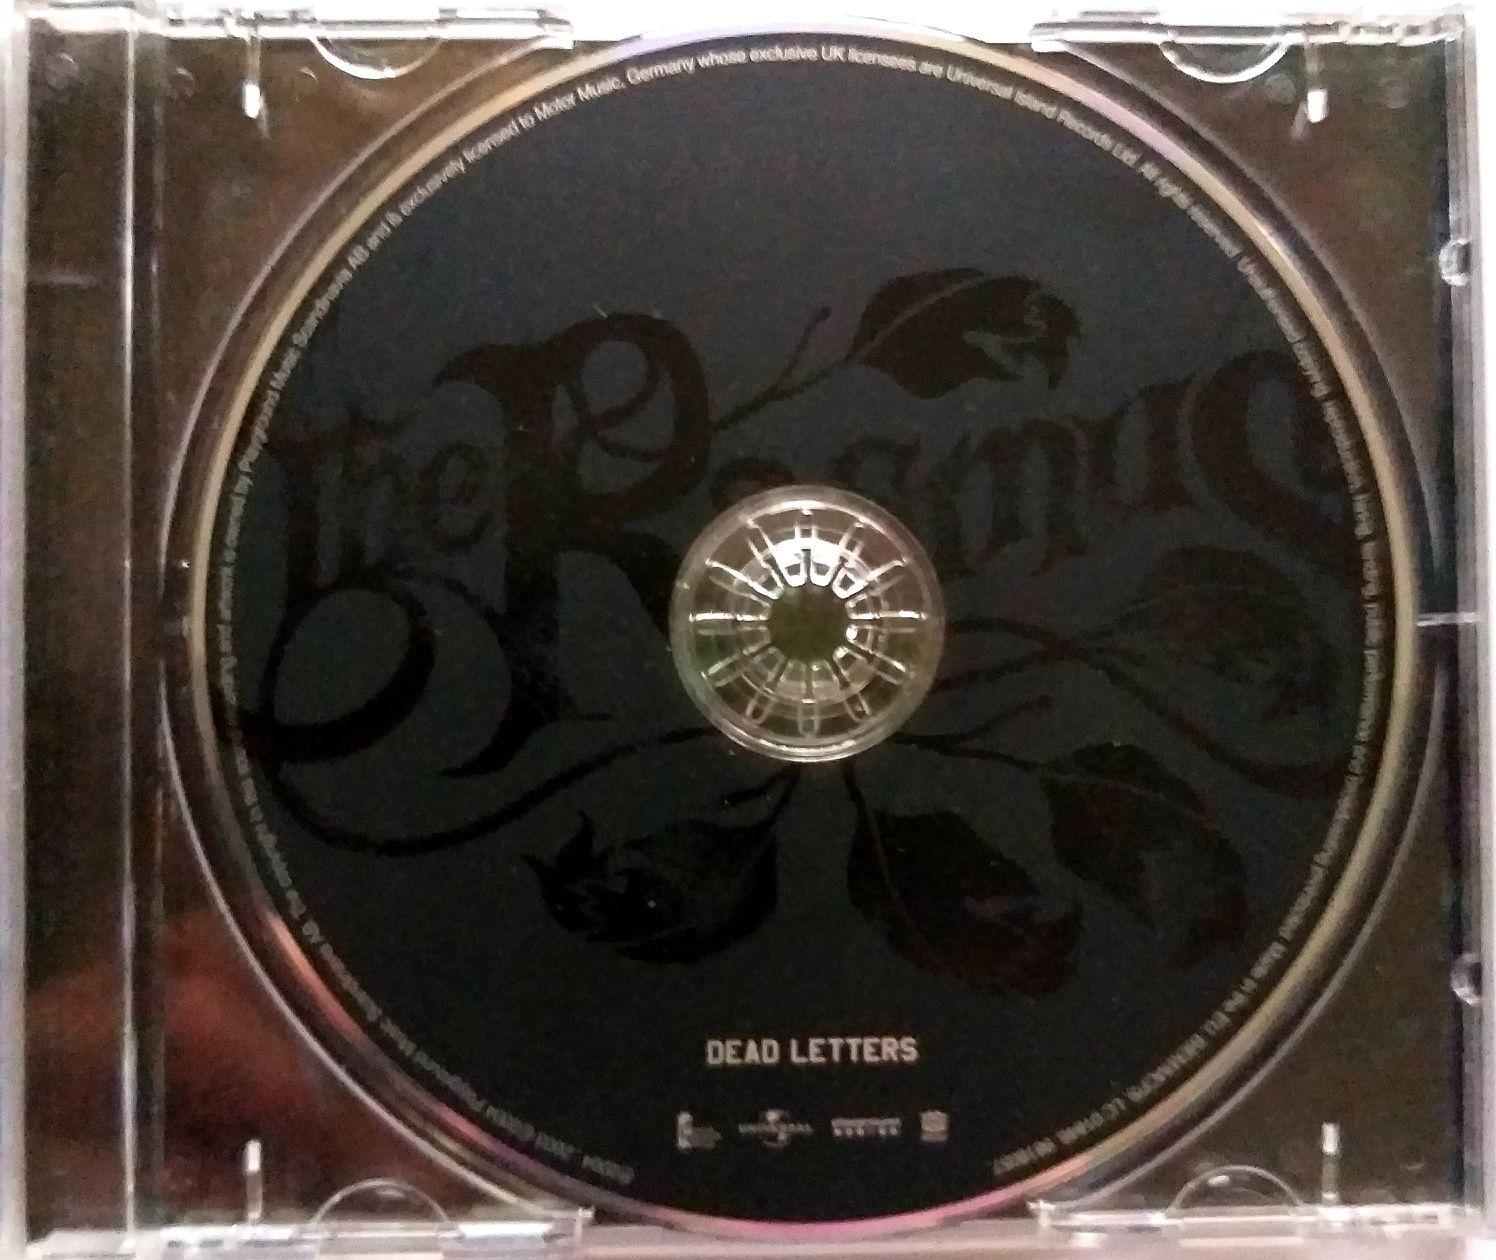 The Rasmus Dead Letters Special Edition 2004r